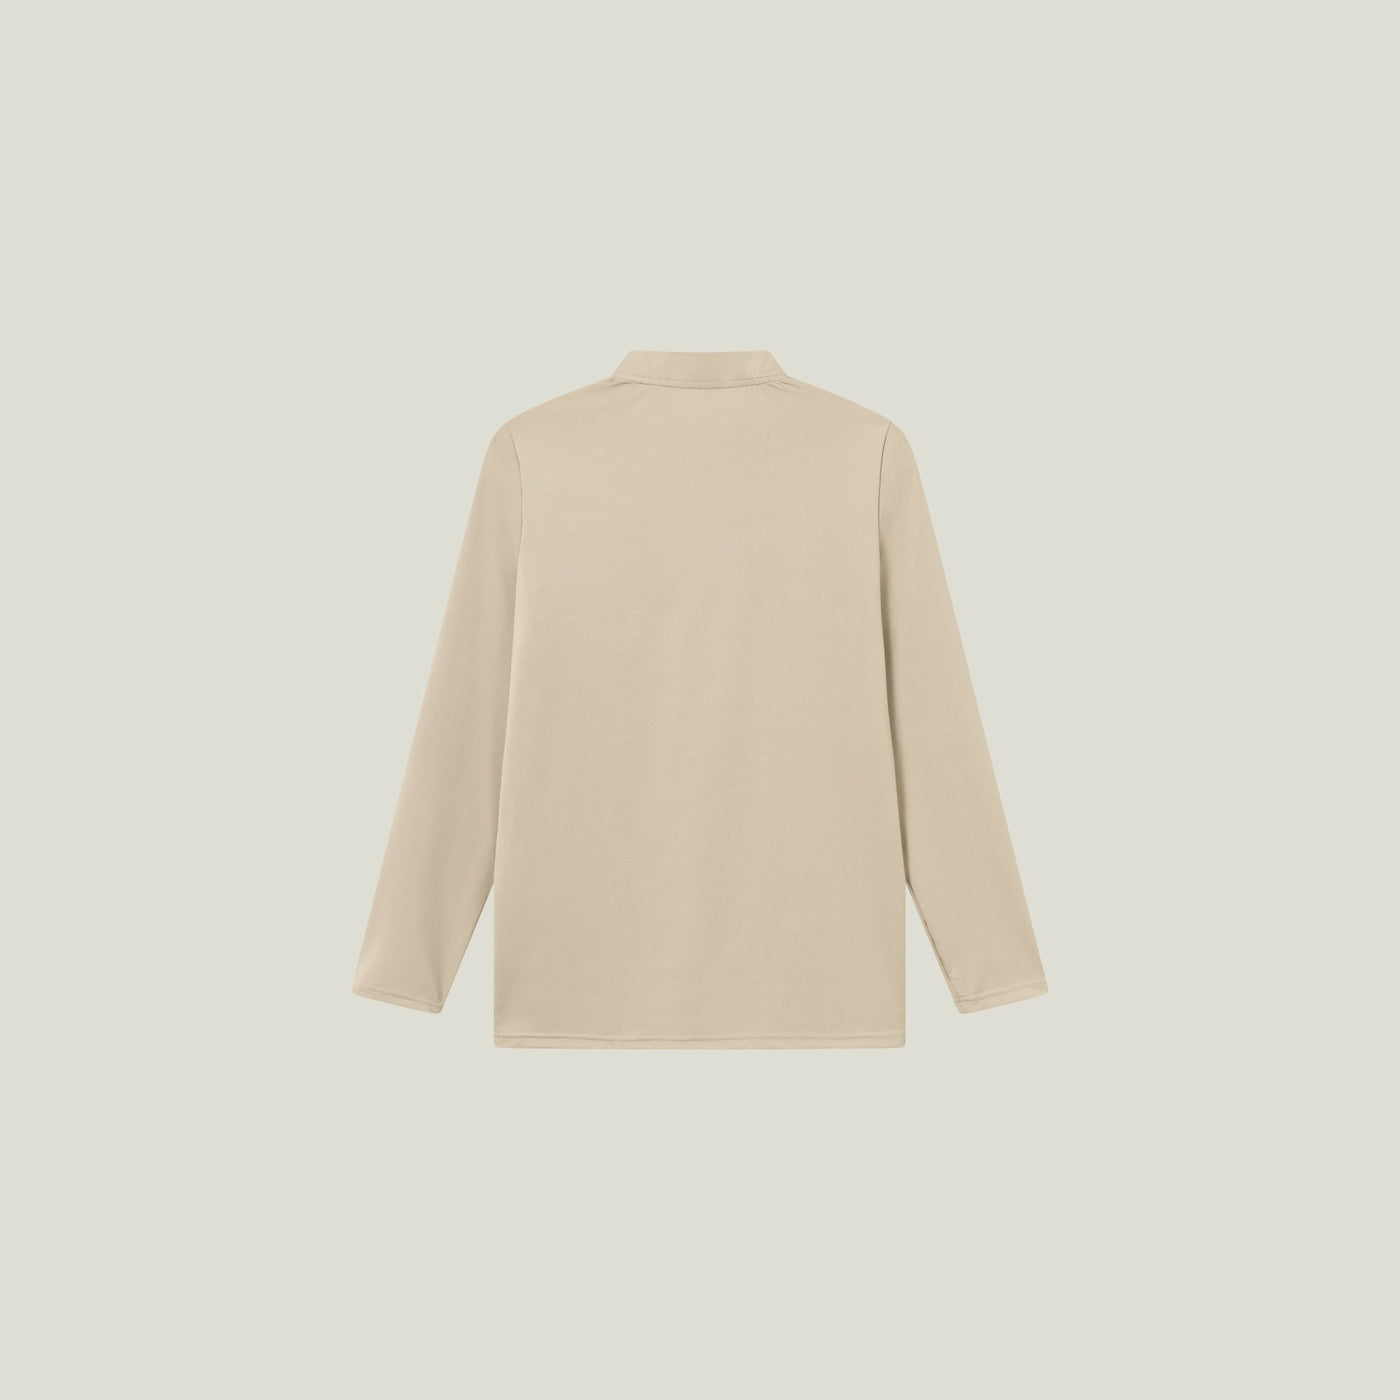 Oncourt WPC LS Polo - Sand